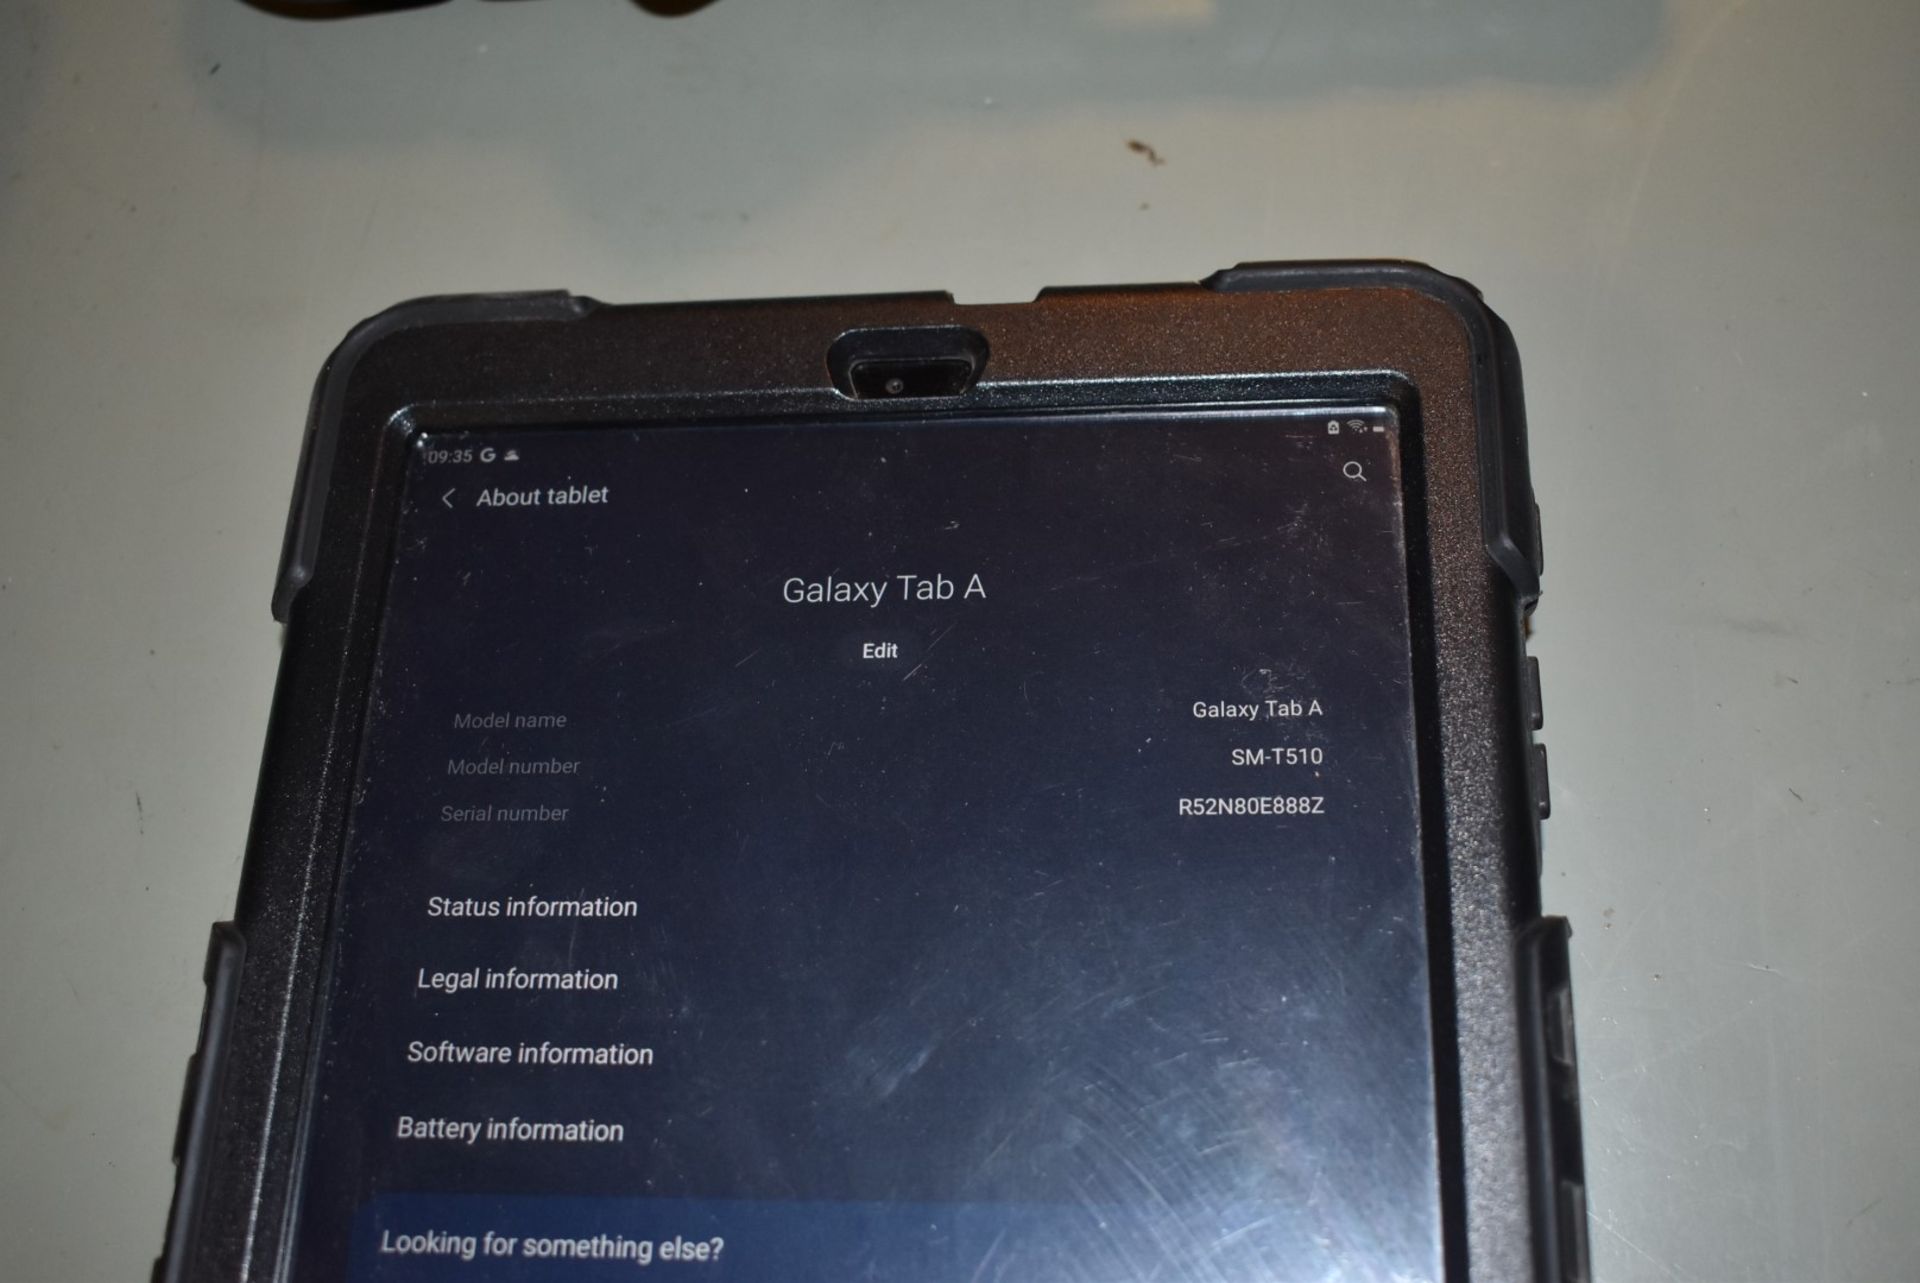 1 x Samsung 32GB 10.1 Inch Galaxy Tab A Tablet - Model SM-T510 - Previously Used in an Office - Image 3 of 4